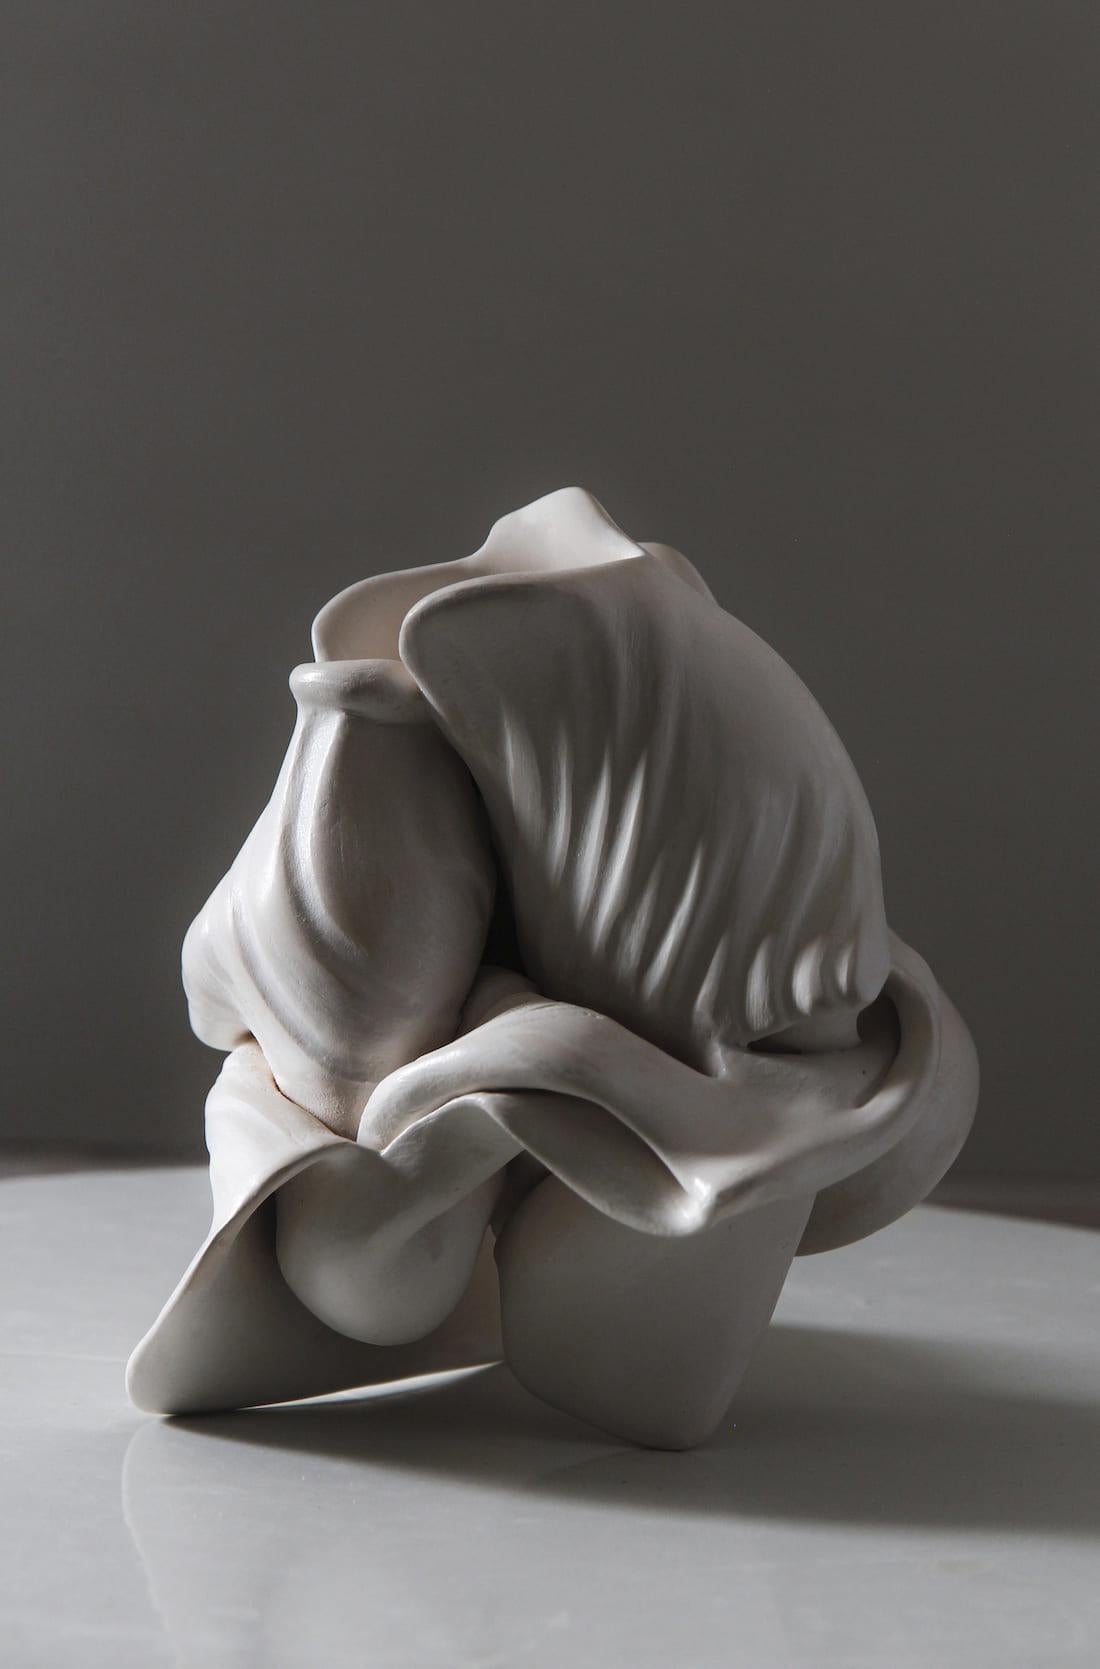 Conch 4, porcelain sculpture by Sharon Brill. 
Wheel thrown and sandblasted porcelain, 14 cm × 14 cm × 13 cm. Sold with a stand made of painted clay.
Israeli ceramic artist Sharon Brill chose to work mainly on porcelain, with which she creates